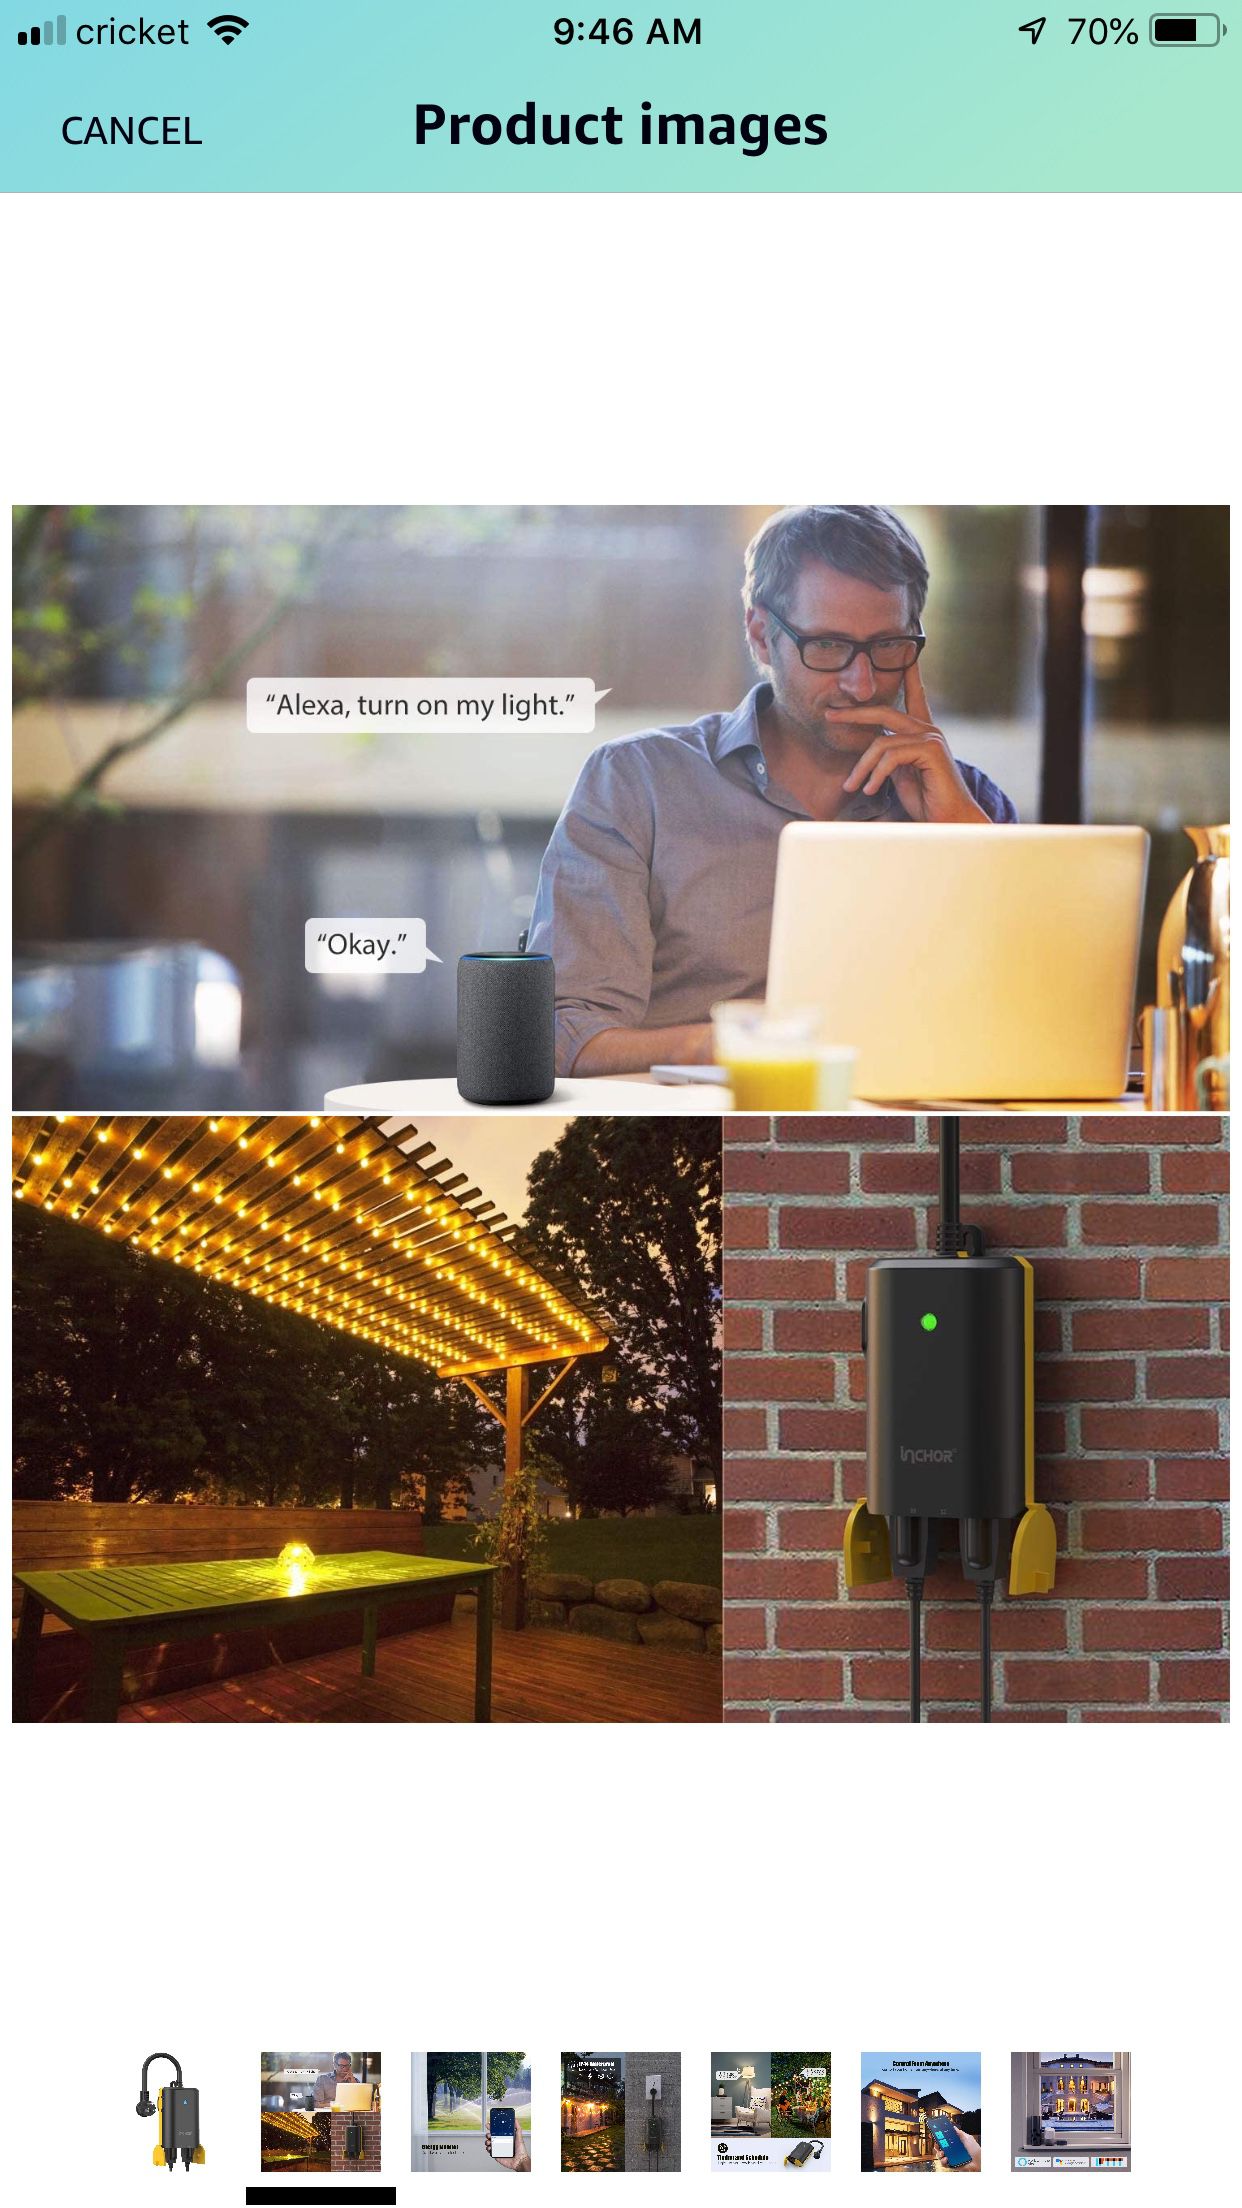 Defiant 15 Amp 120-Volt Smart Outdoor Single Outlet Wi-Fi Bluetooth Plug  Powered by Hubspace for Sale in Glendale, AZ - OfferUp